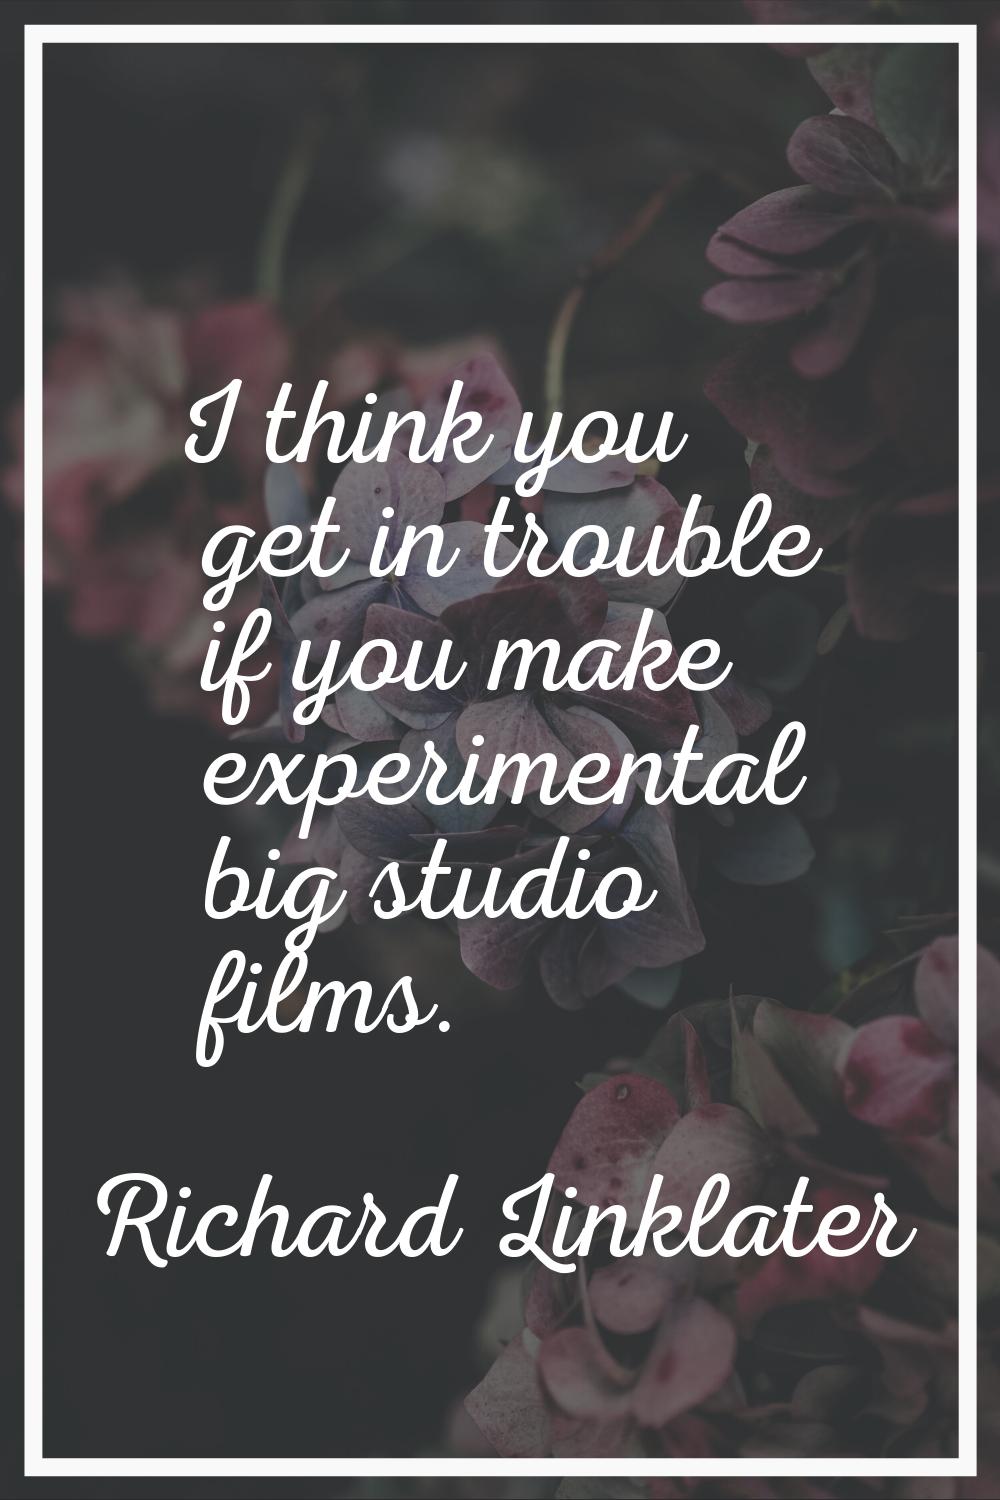 I think you get in trouble if you make experimental big studio films.